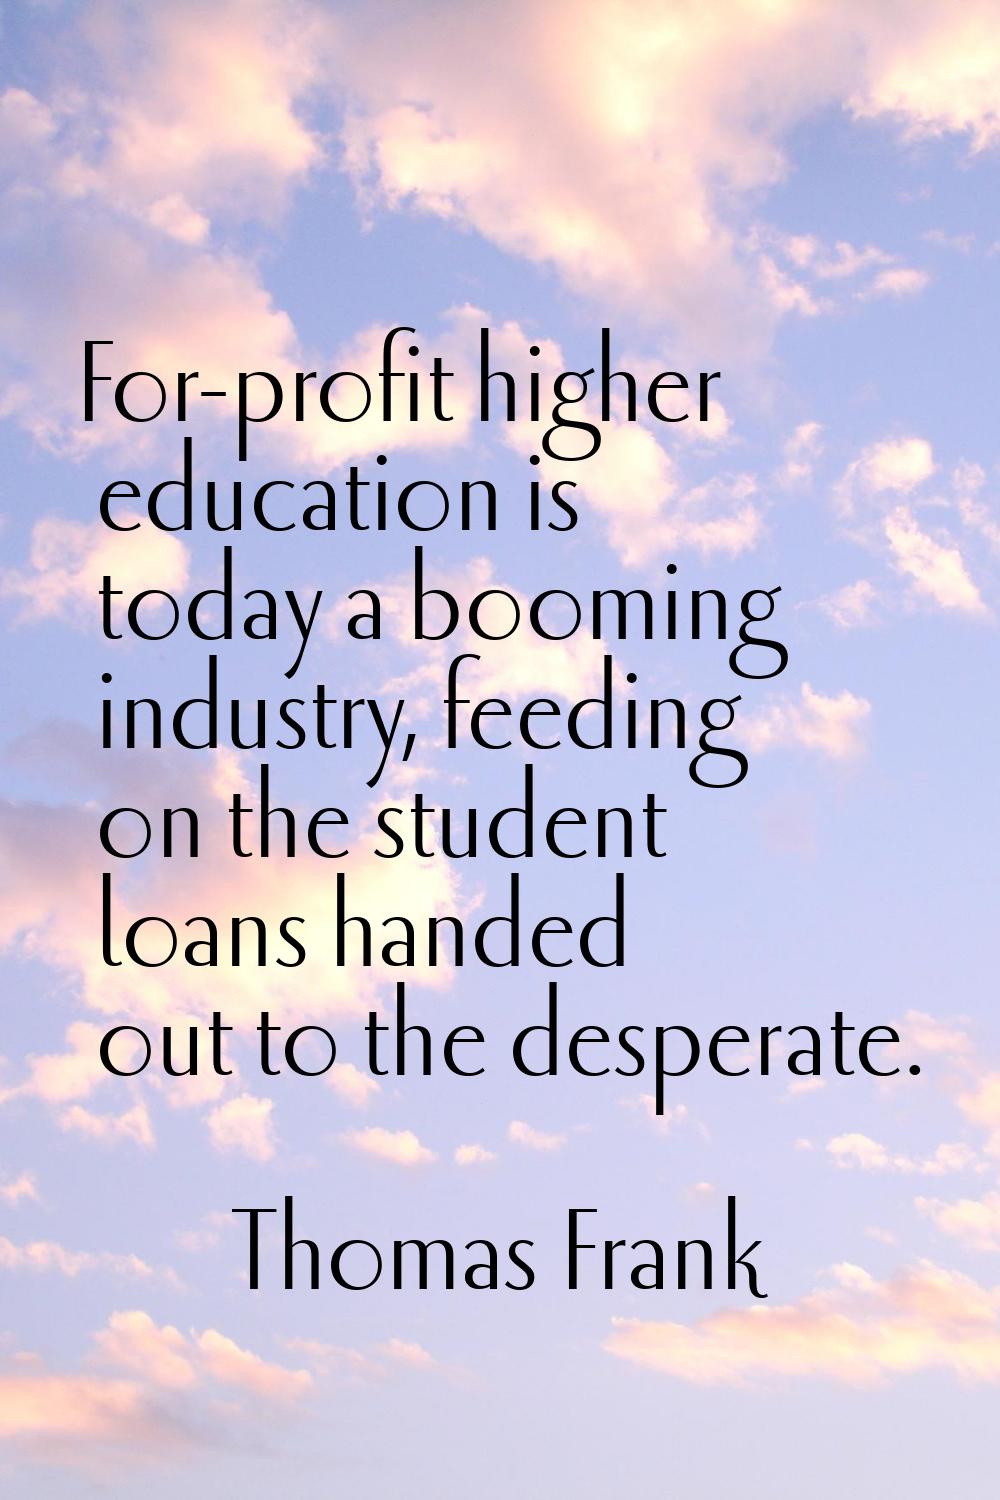 For-profit higher education is today a booming industry, feeding on the student loans handed out to